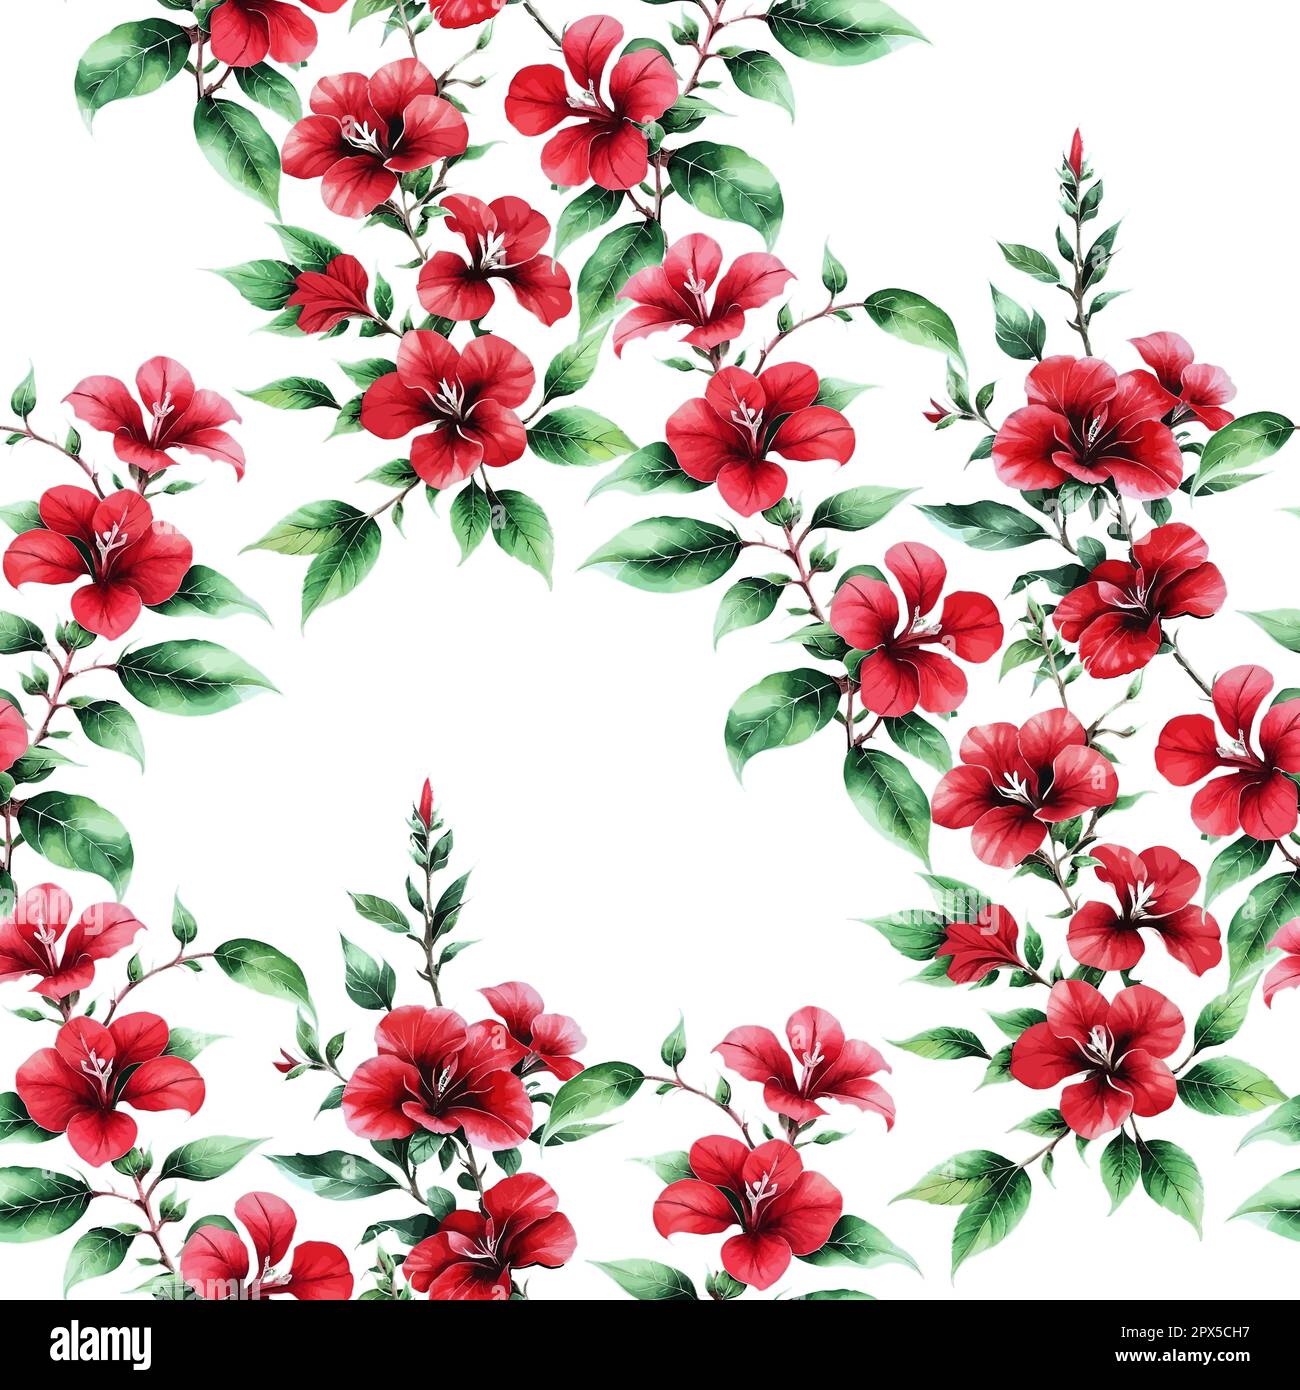 Red Barleria flowers with green leaves, floral seamless pattern, watercolor style, motif for print, fabric, wrapping paper, wallpaper design element, packaging, cosmetics, beauty products Stock Vector